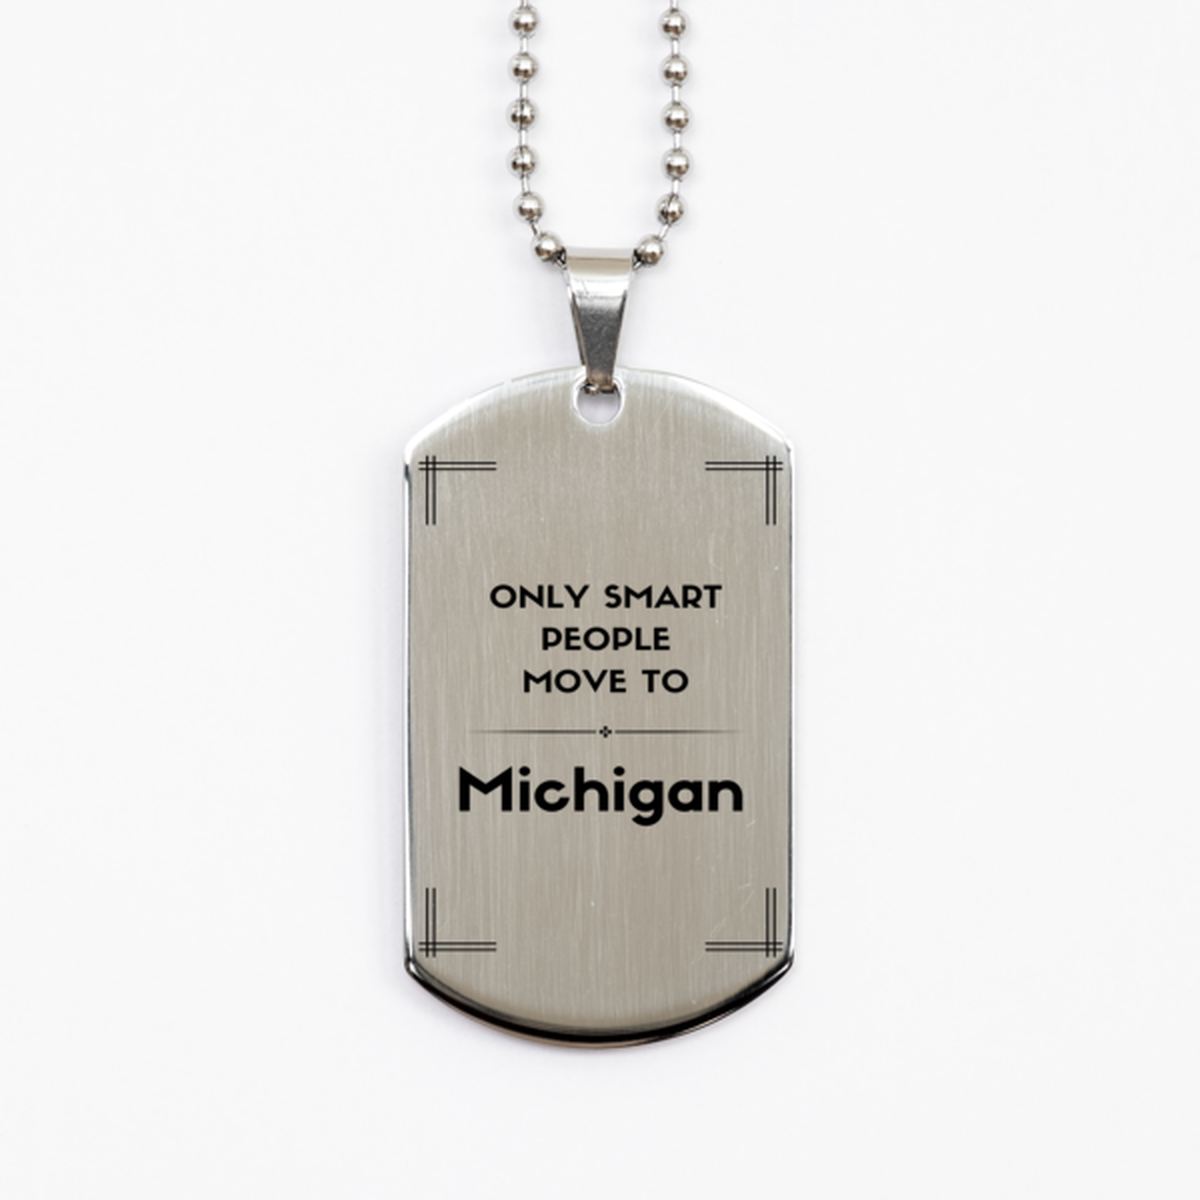 Only smart people move to Michigan Silver Dog Tag, Gag Gifts For Michigan, Move to Michigan Gifts for Friends Coworker Funny Saying Quote